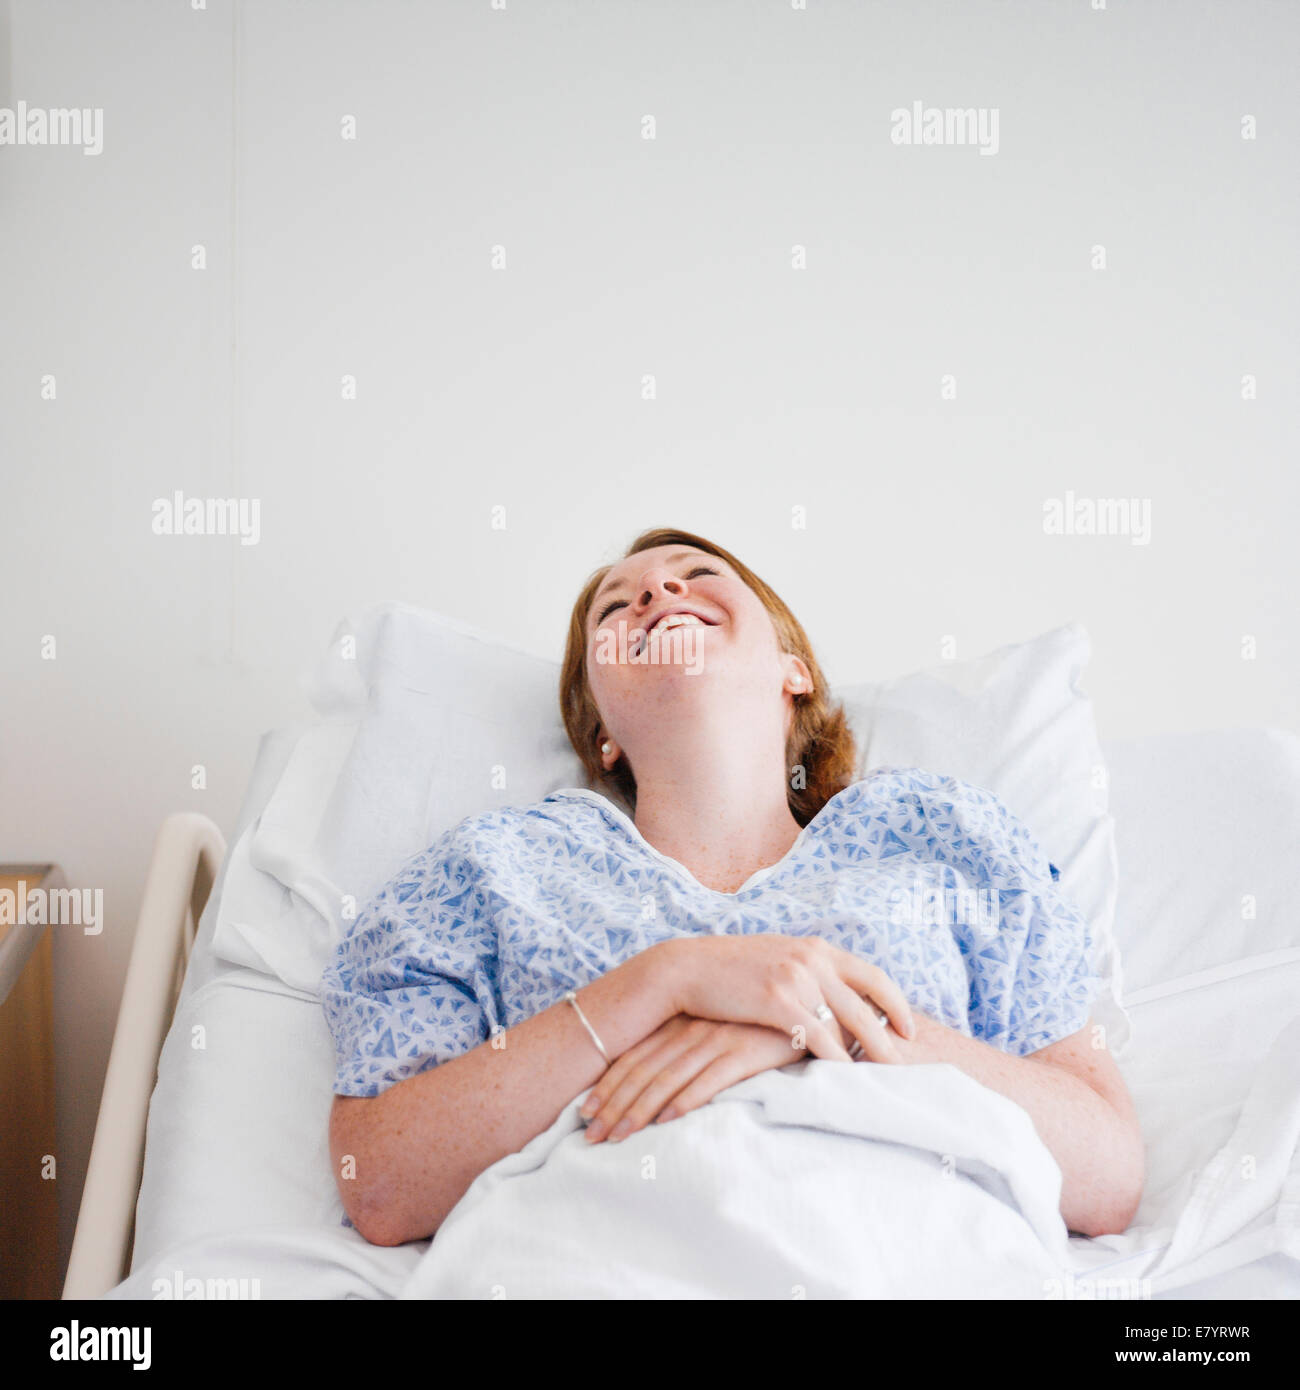 View of woman lying in hospital bed and laughing Stock Photo